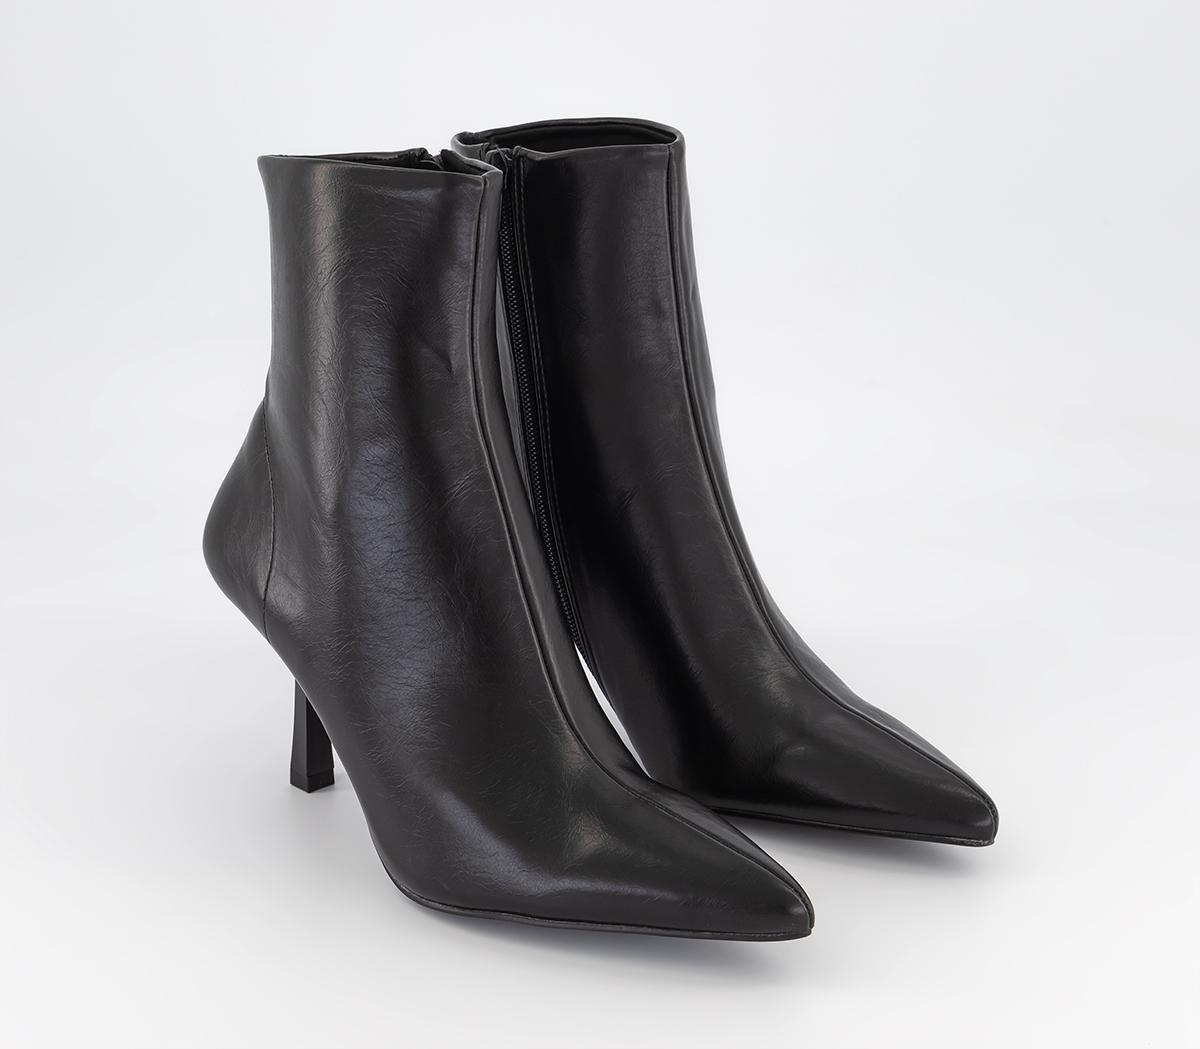 OFFICE All Set Point Toe Ankle Boots Black Leather - Women's Boots